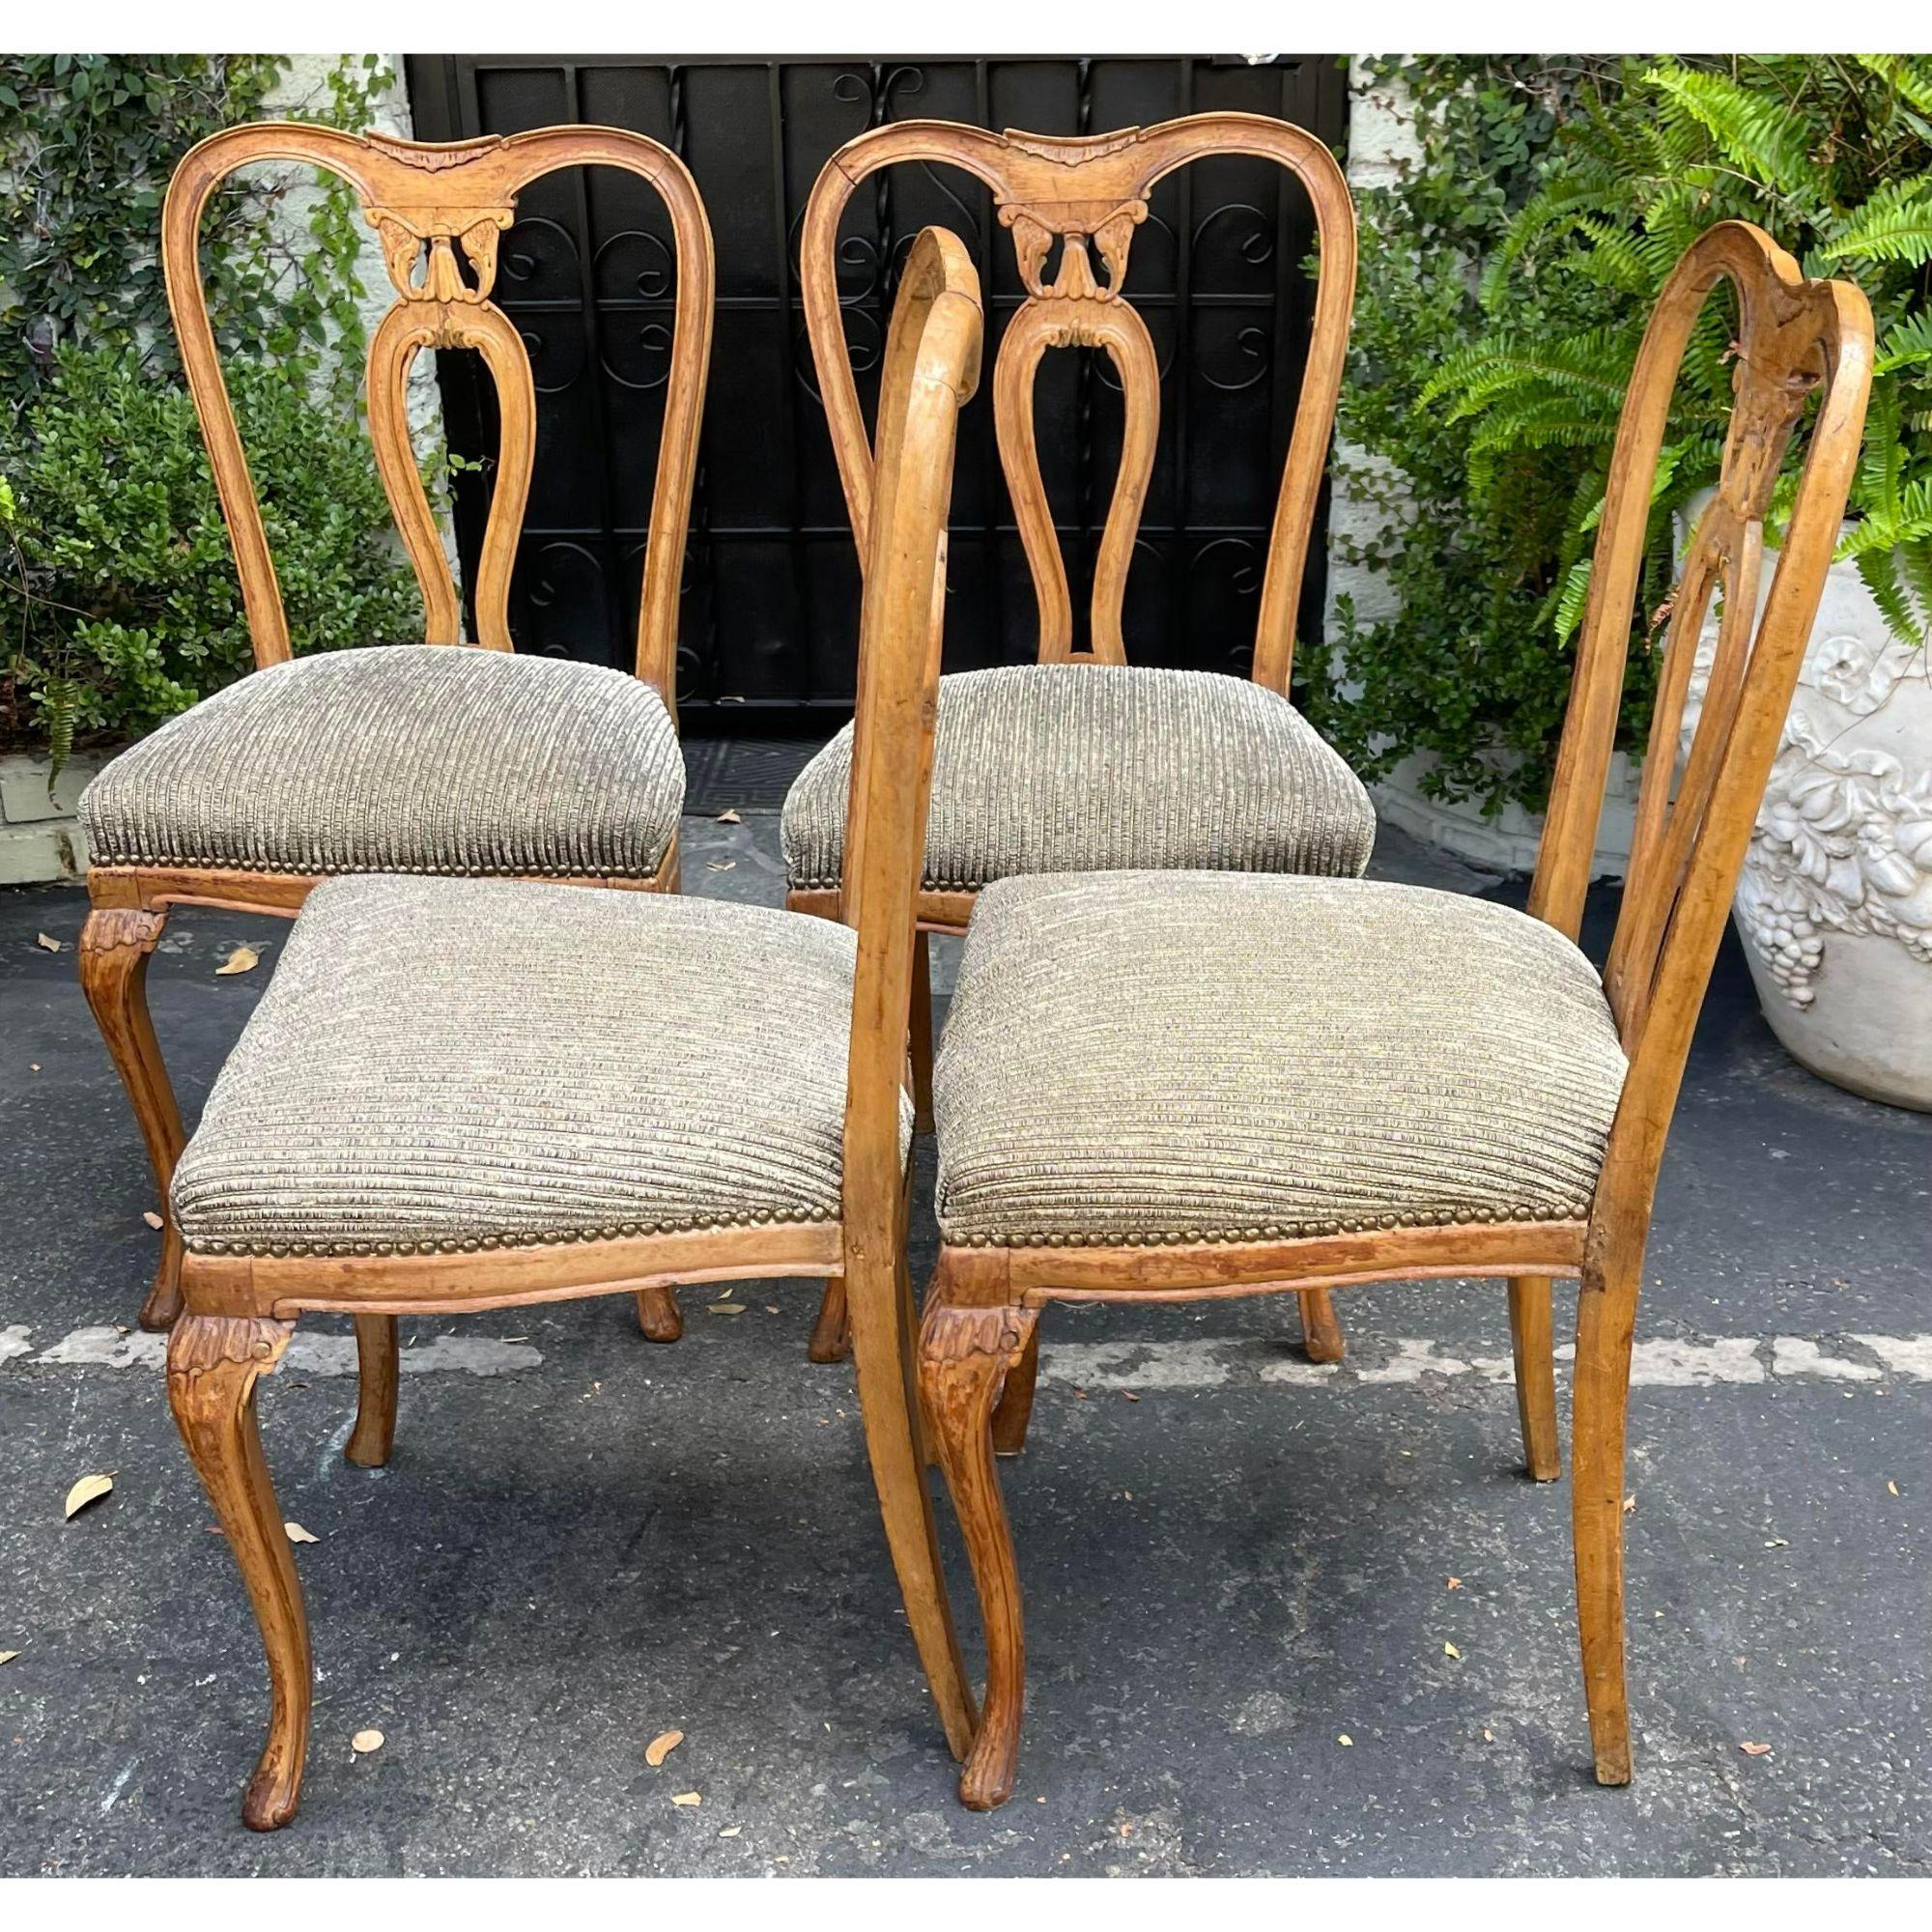 19th C Style Carved Italian dining chairs - Set of 4. This lovely set of four chairs are hand carved solid walnut and were made in Italy. Each features a chenille seat.

Additional information: 
Materials: Walnut
Color: Brown
Period: Mid 20th